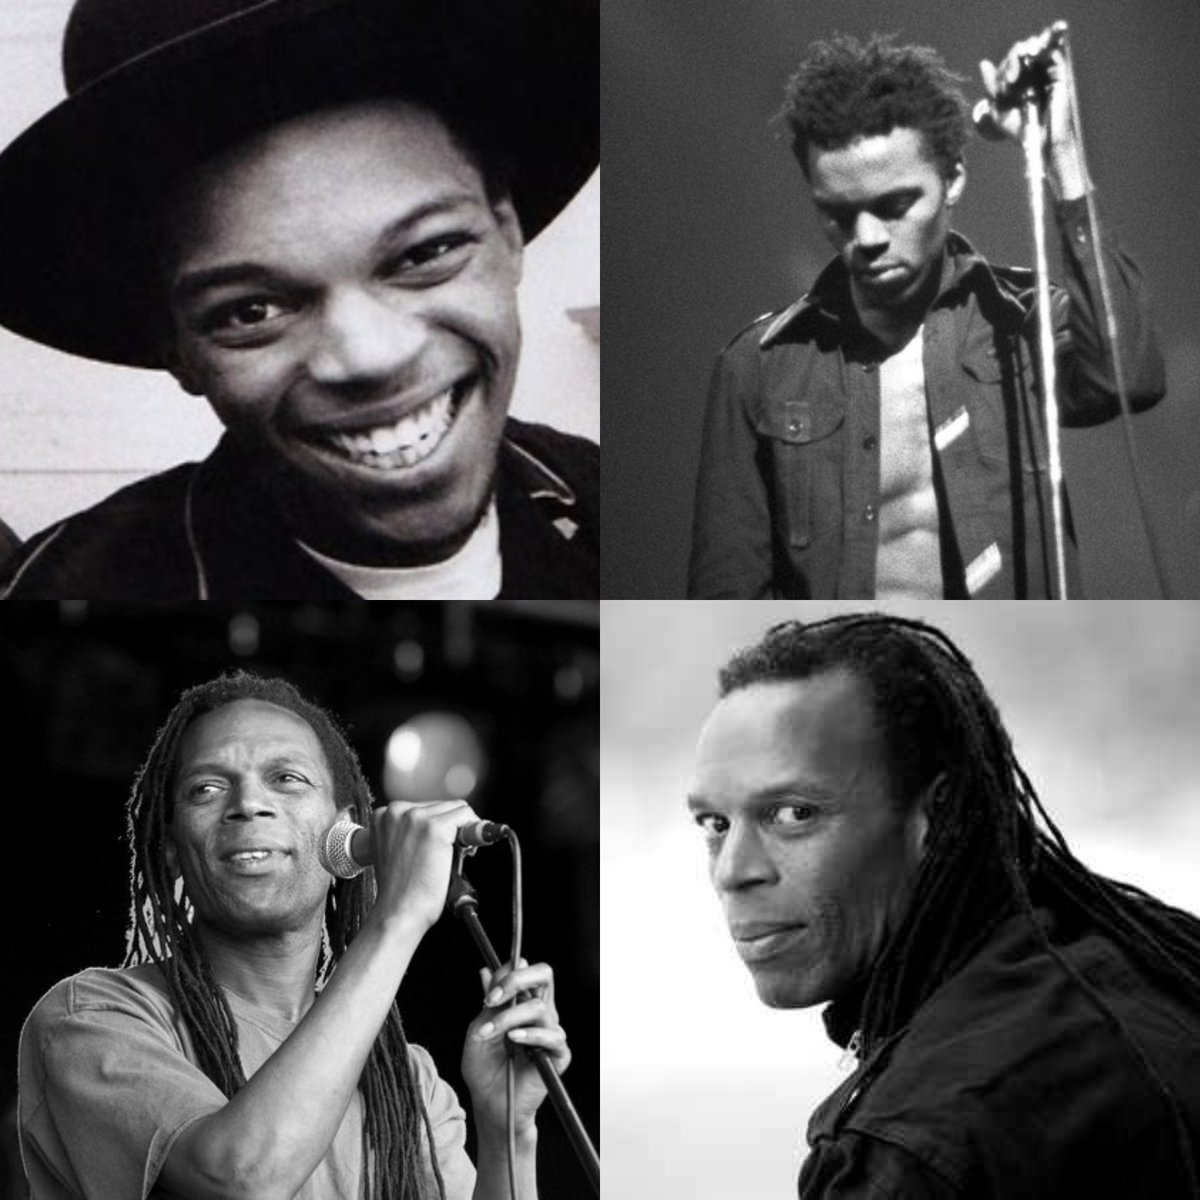 Remembering
the late great 
#RankingRoger
born on this date in 1963.
What are your 
favourite tracks by 
The Beat and General Public?